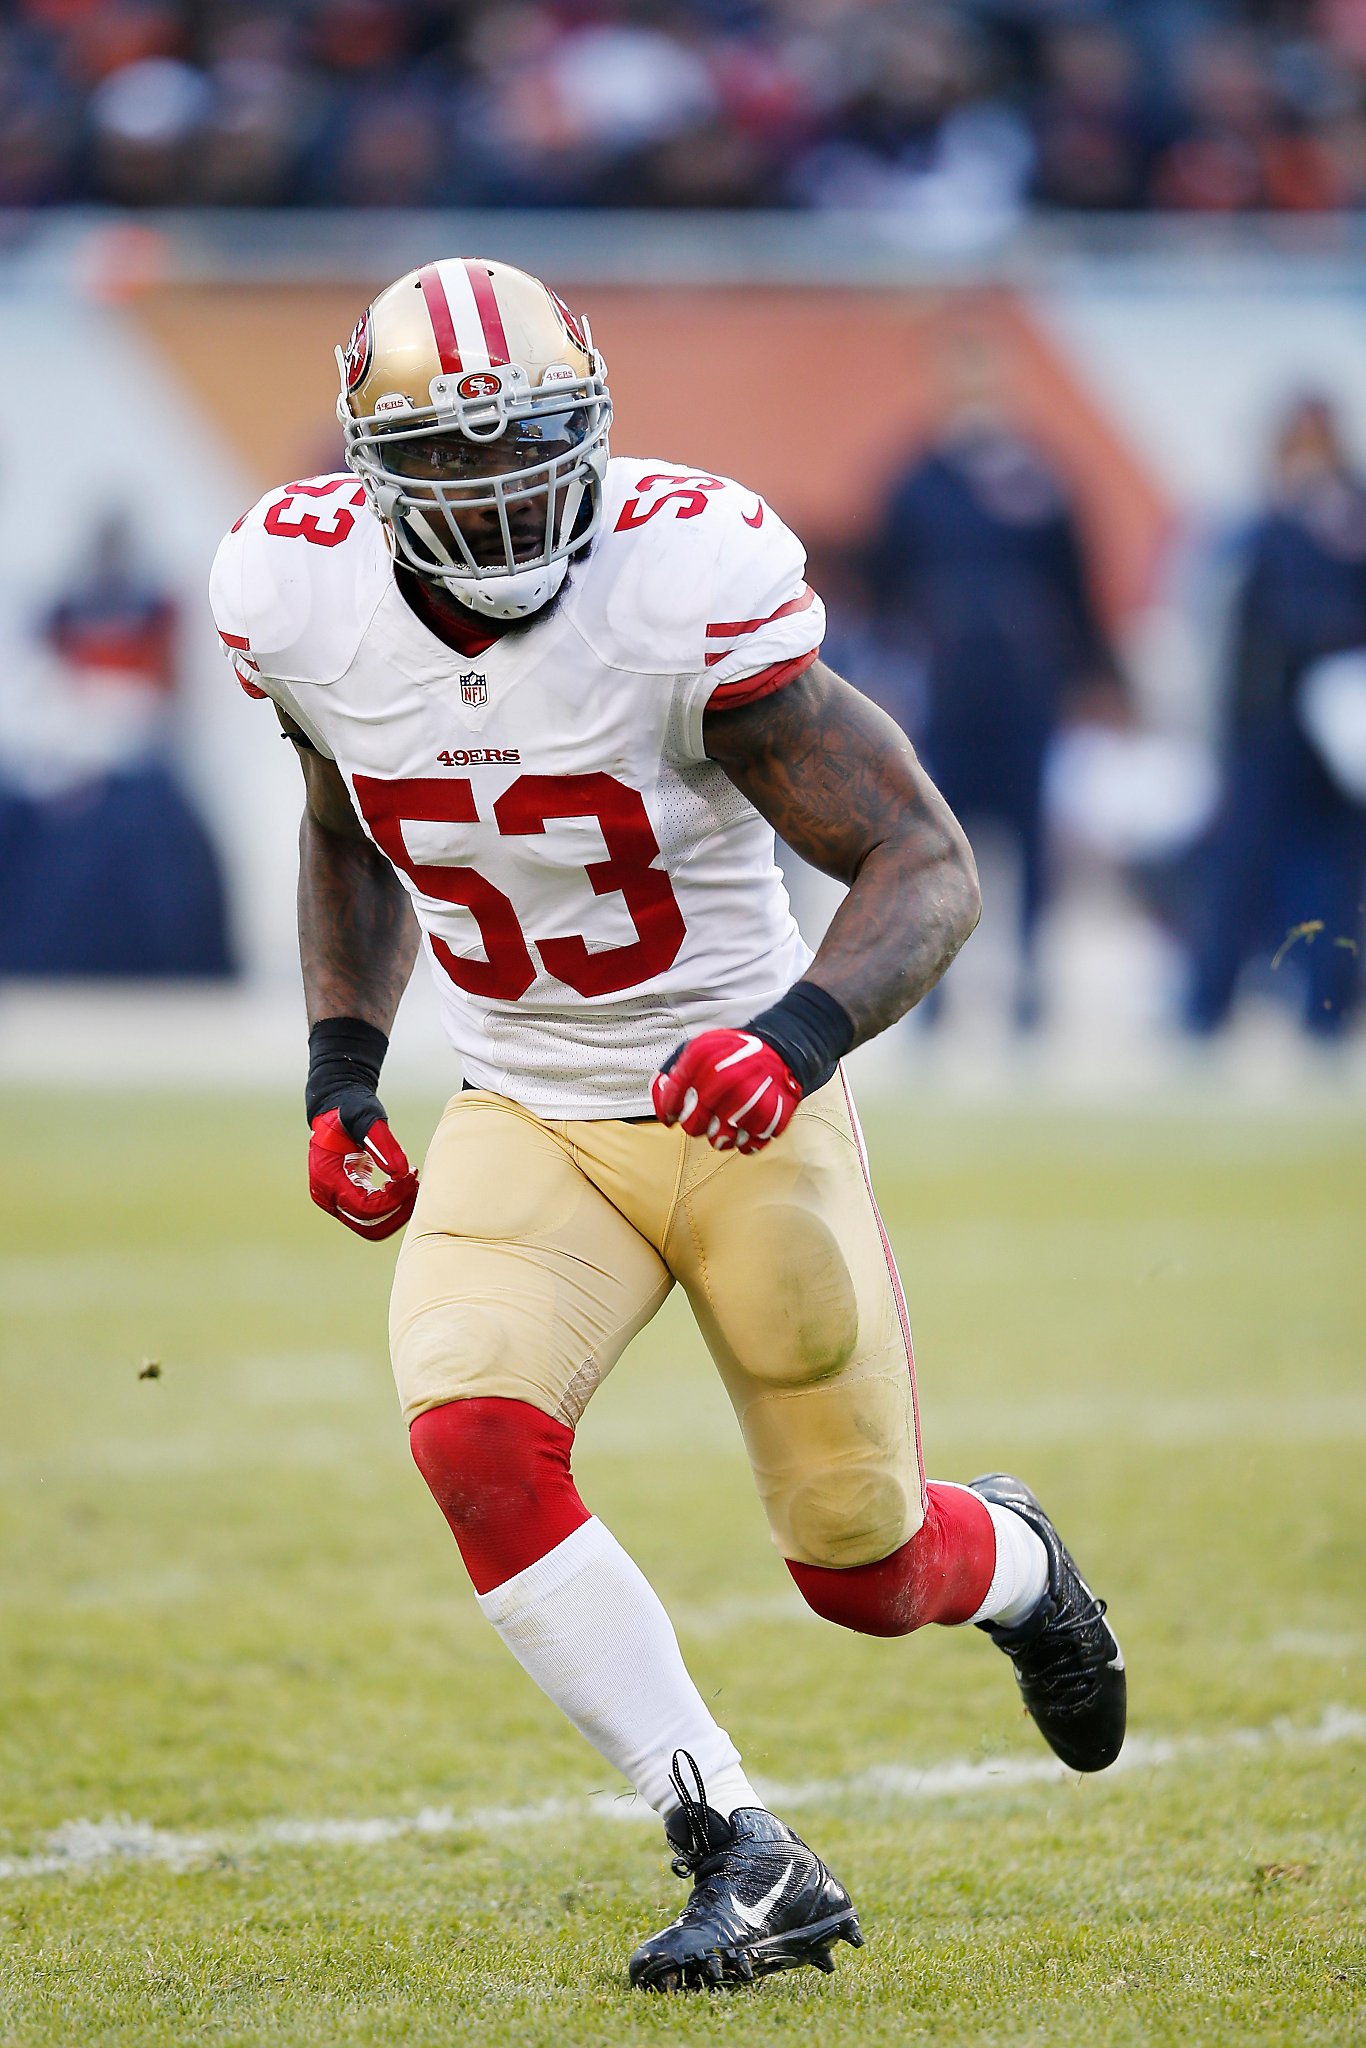 Justreleased NaVorro Bowman might have his next job in Oakland